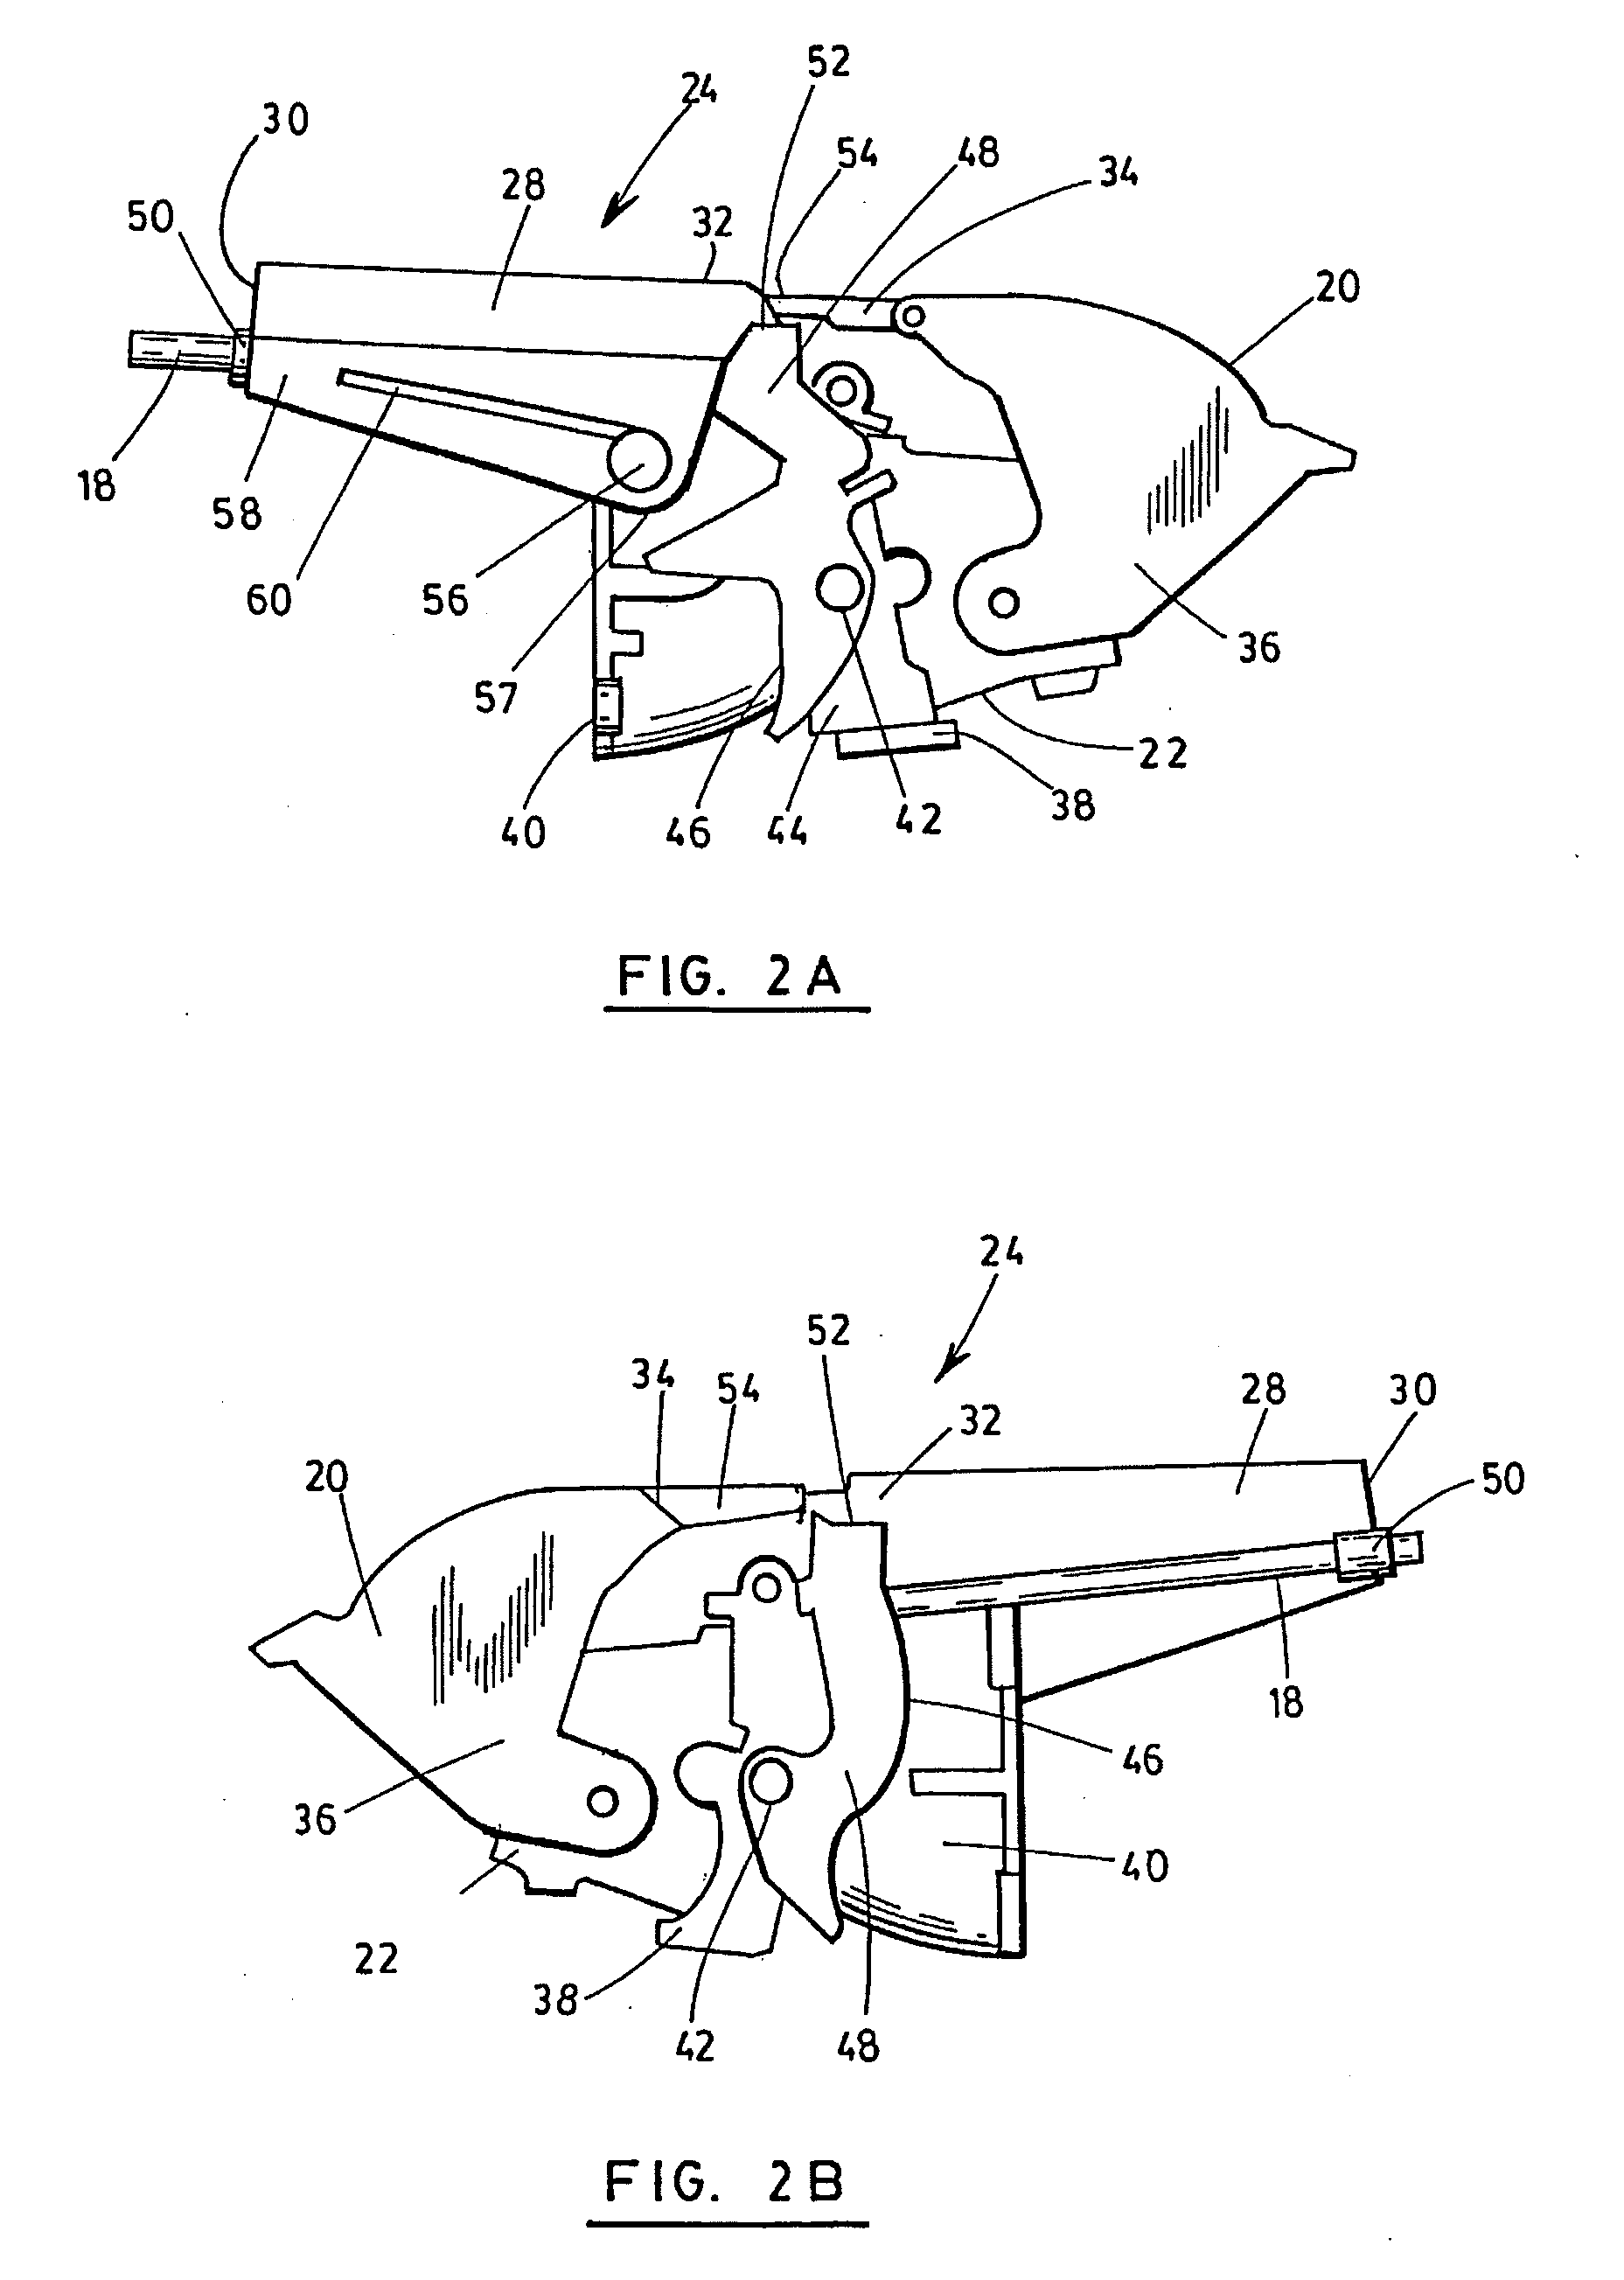 Automatic trim system for a jet propulsion watercraft